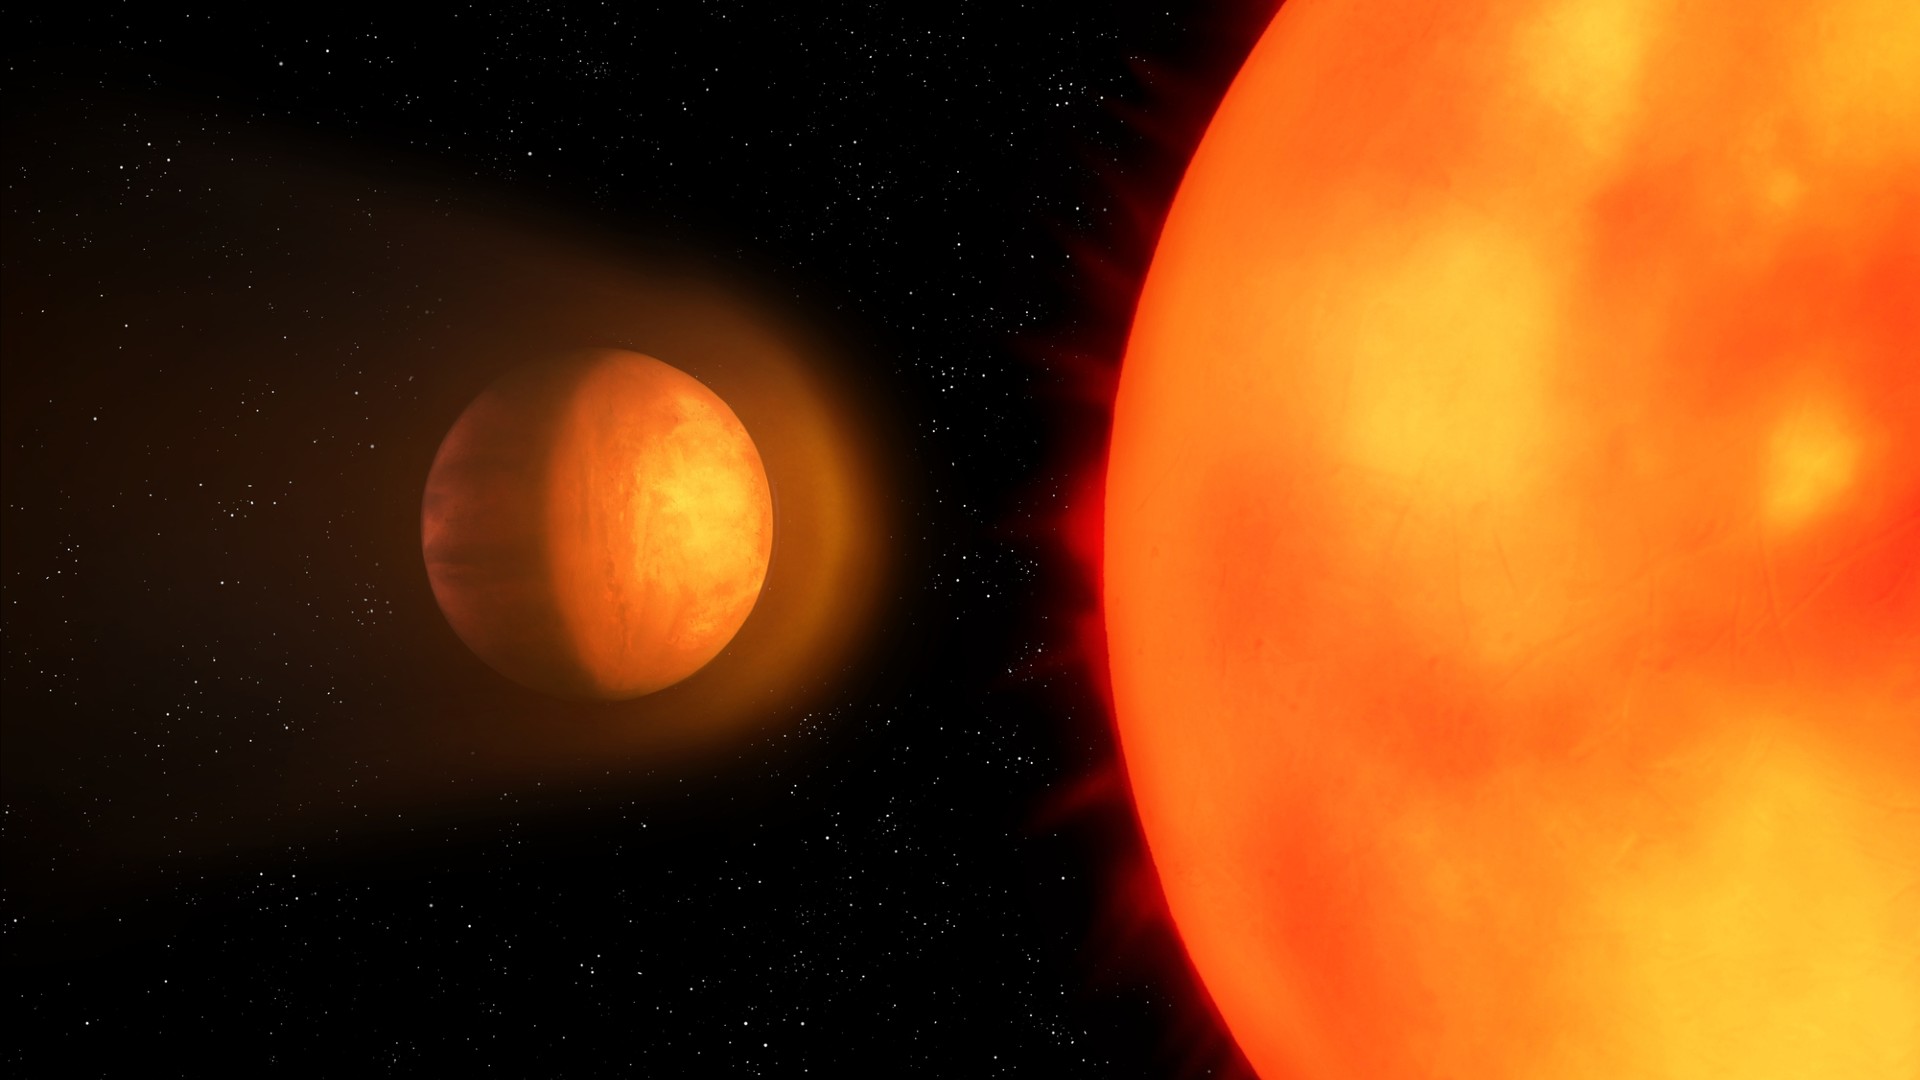 An illustration of a hot Jupiter orbiting its parent star closely.